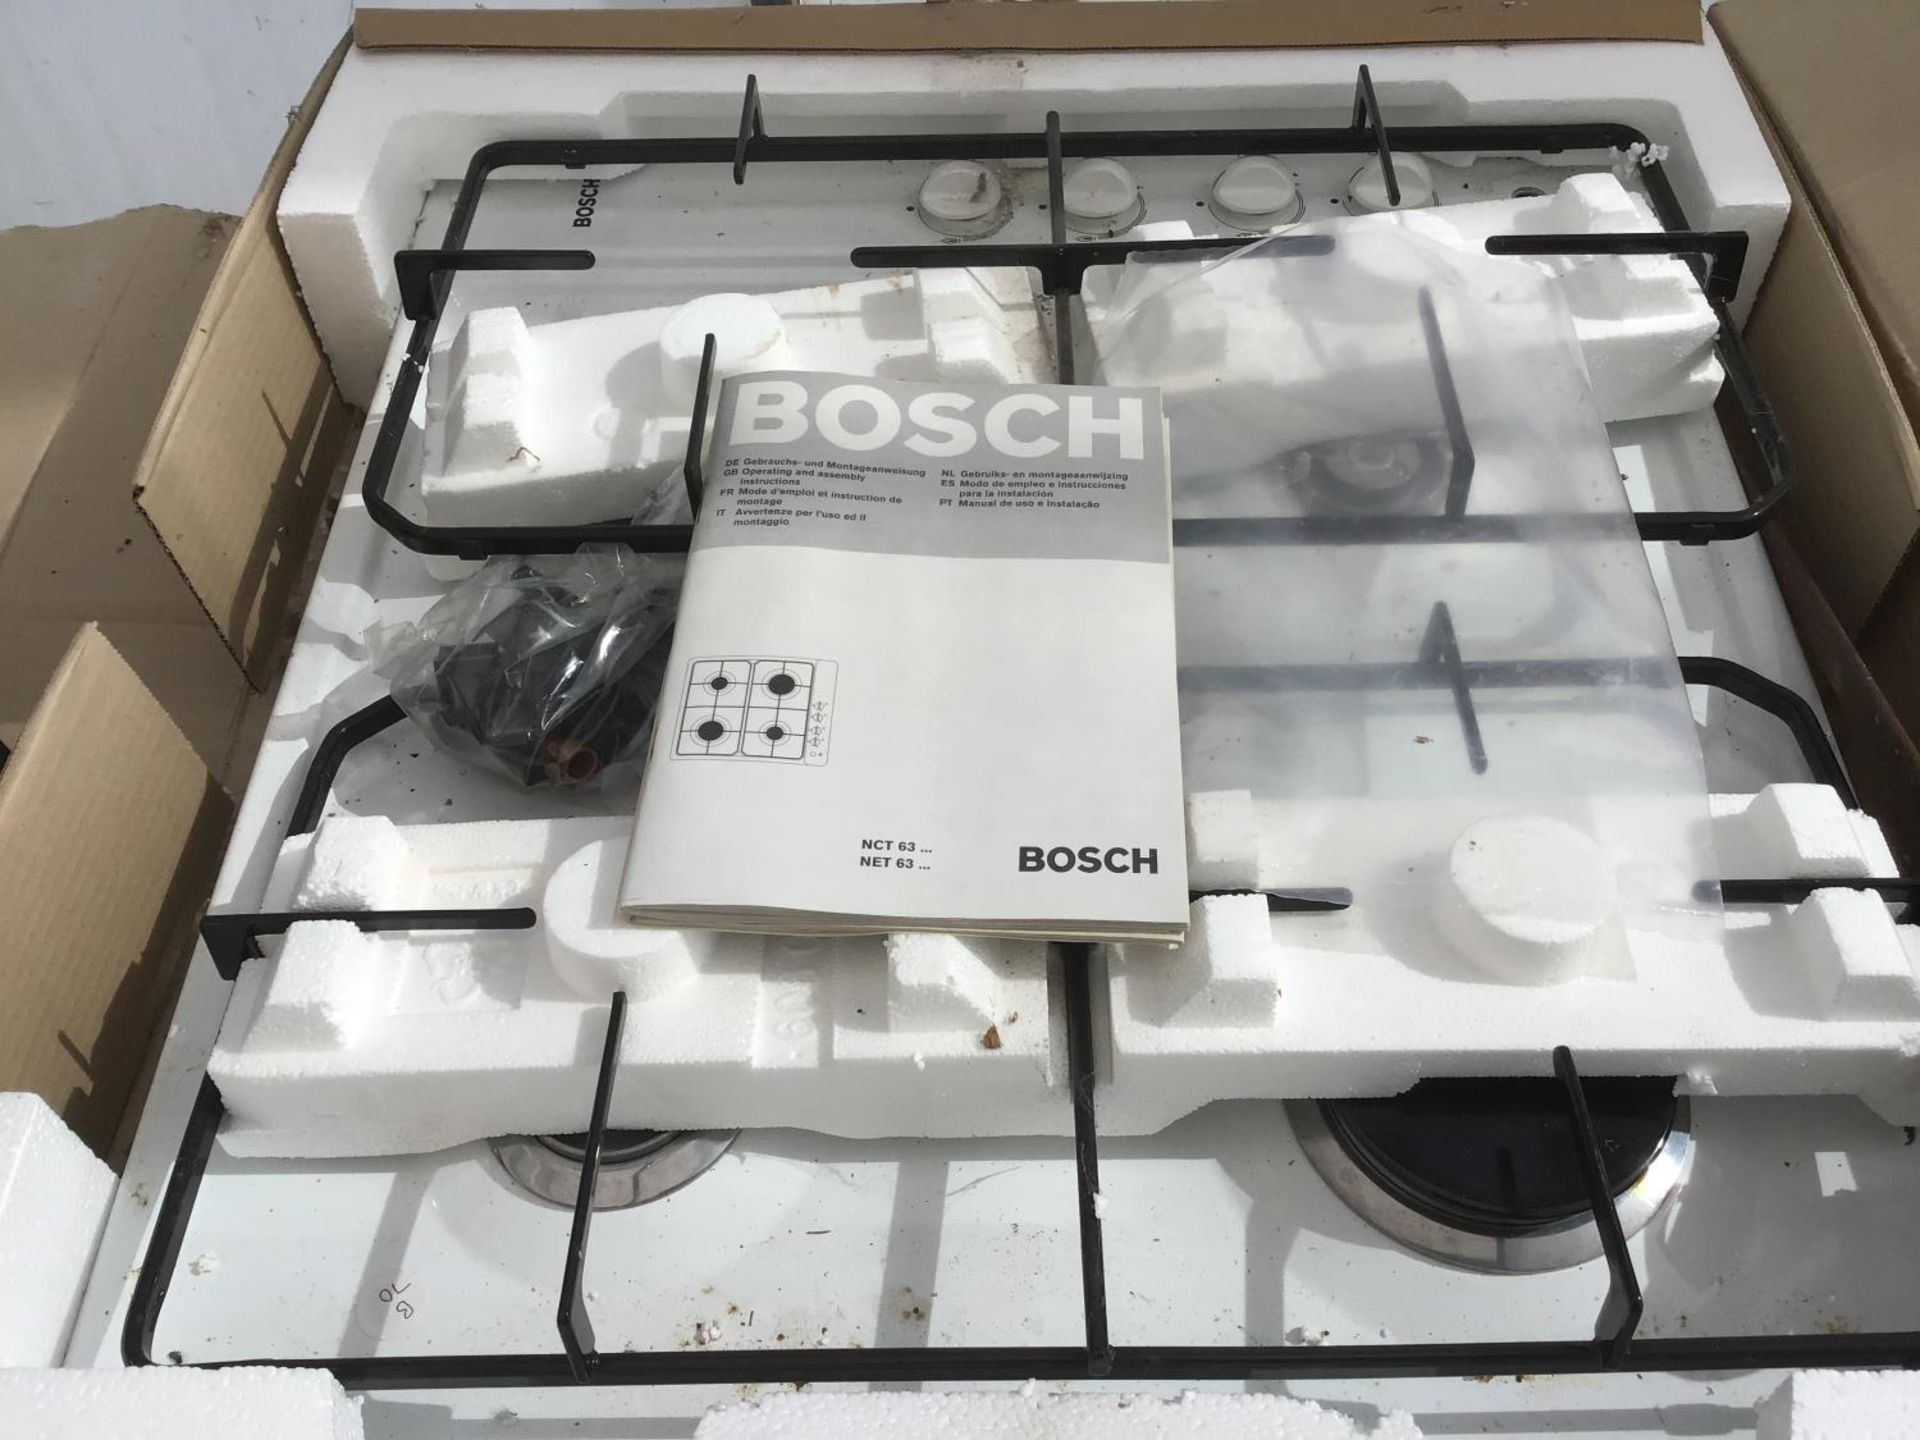 BOSCH FOUR RING GAS HOB, BOXED AND AS NEW